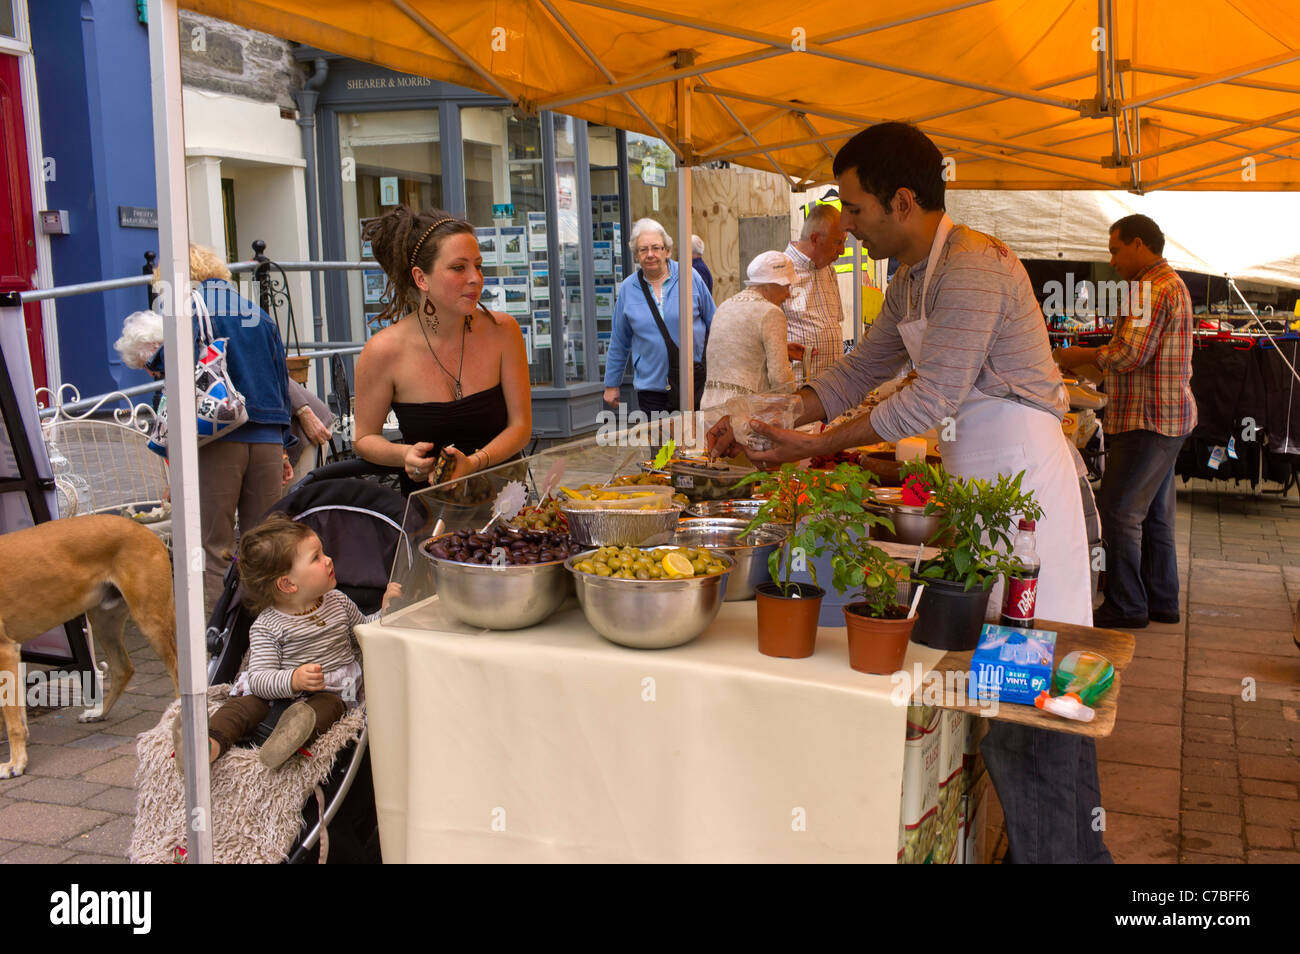 Attractive summery dressed mother with child in buggy market stall shops for salads and spices in town high street, busy scene. Stock Photo